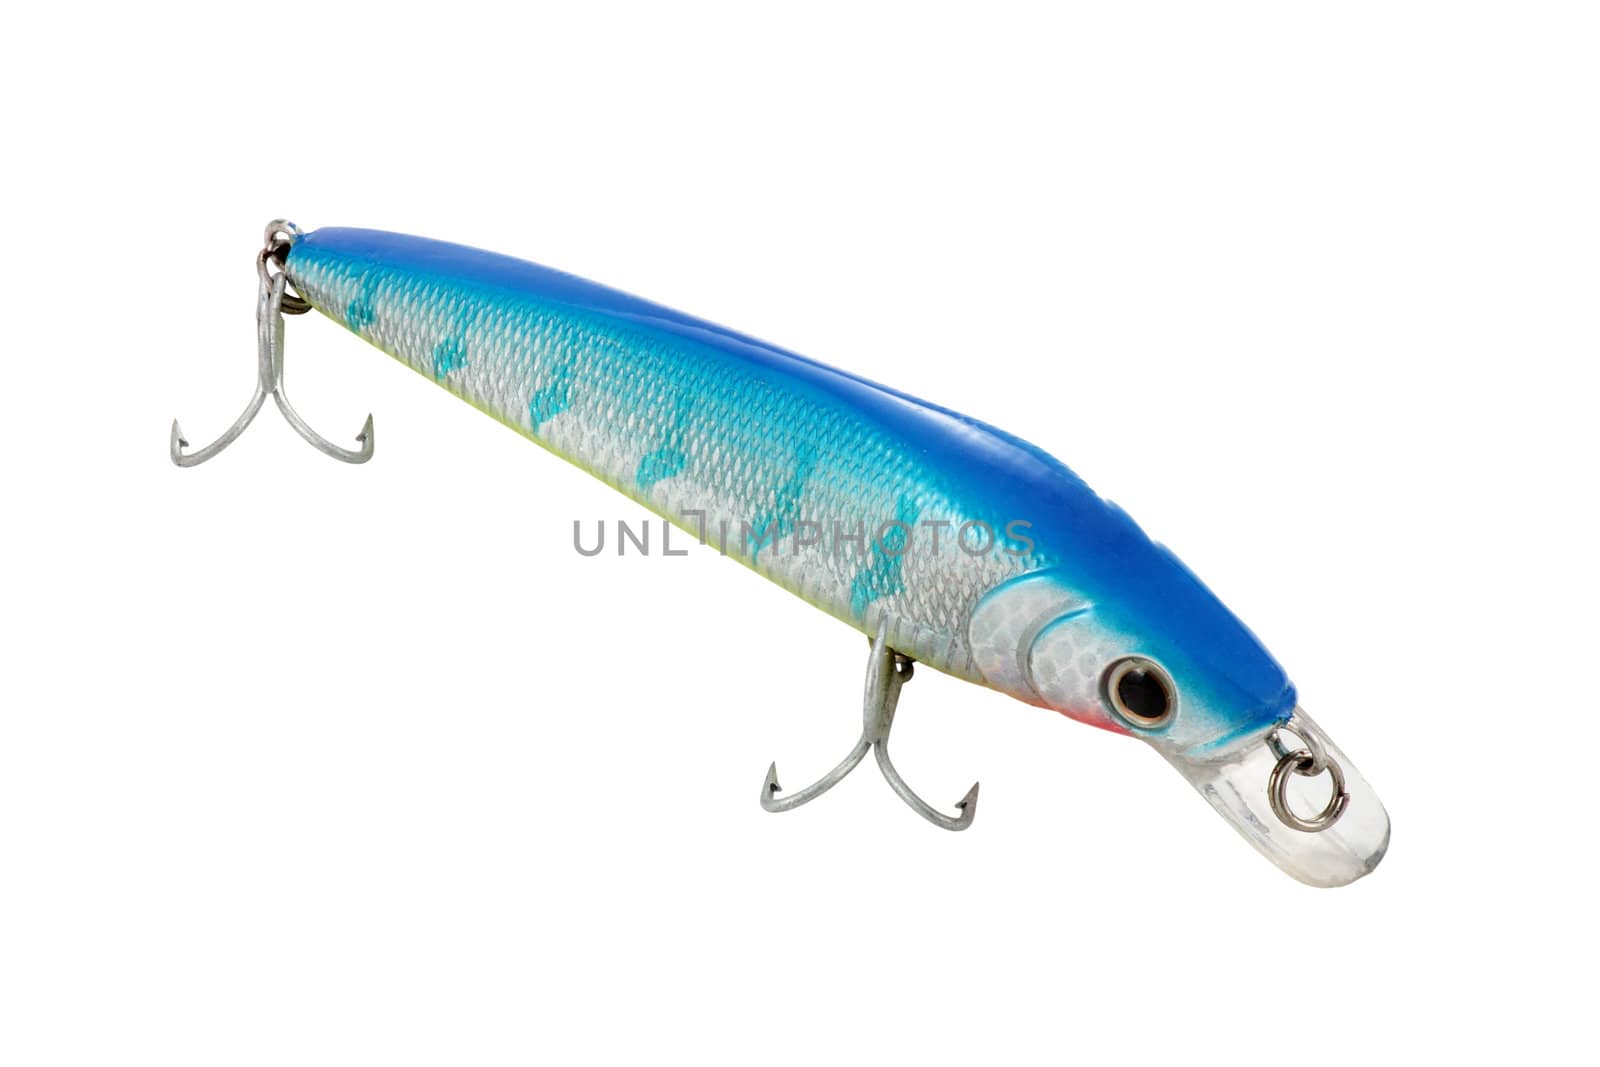 decoy imitation of fish for the fishing of colors blue and red with silver triple hooks cut and isolated